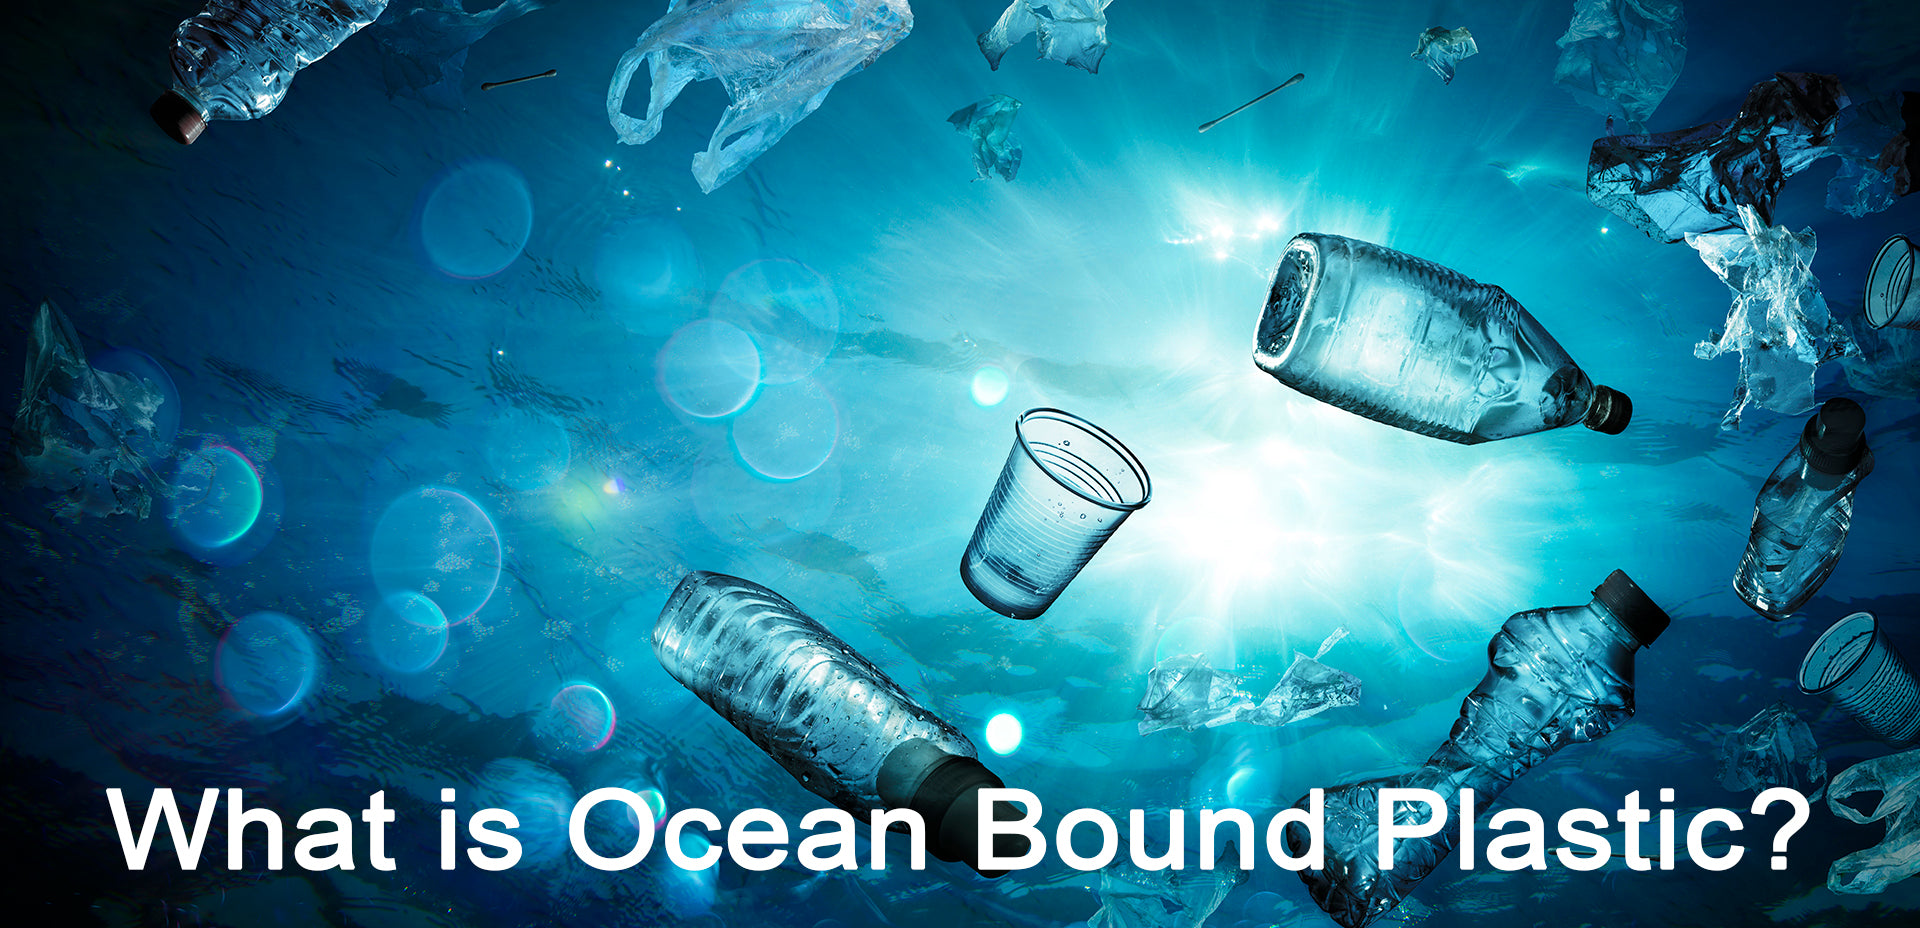 Ocean bound plastic products